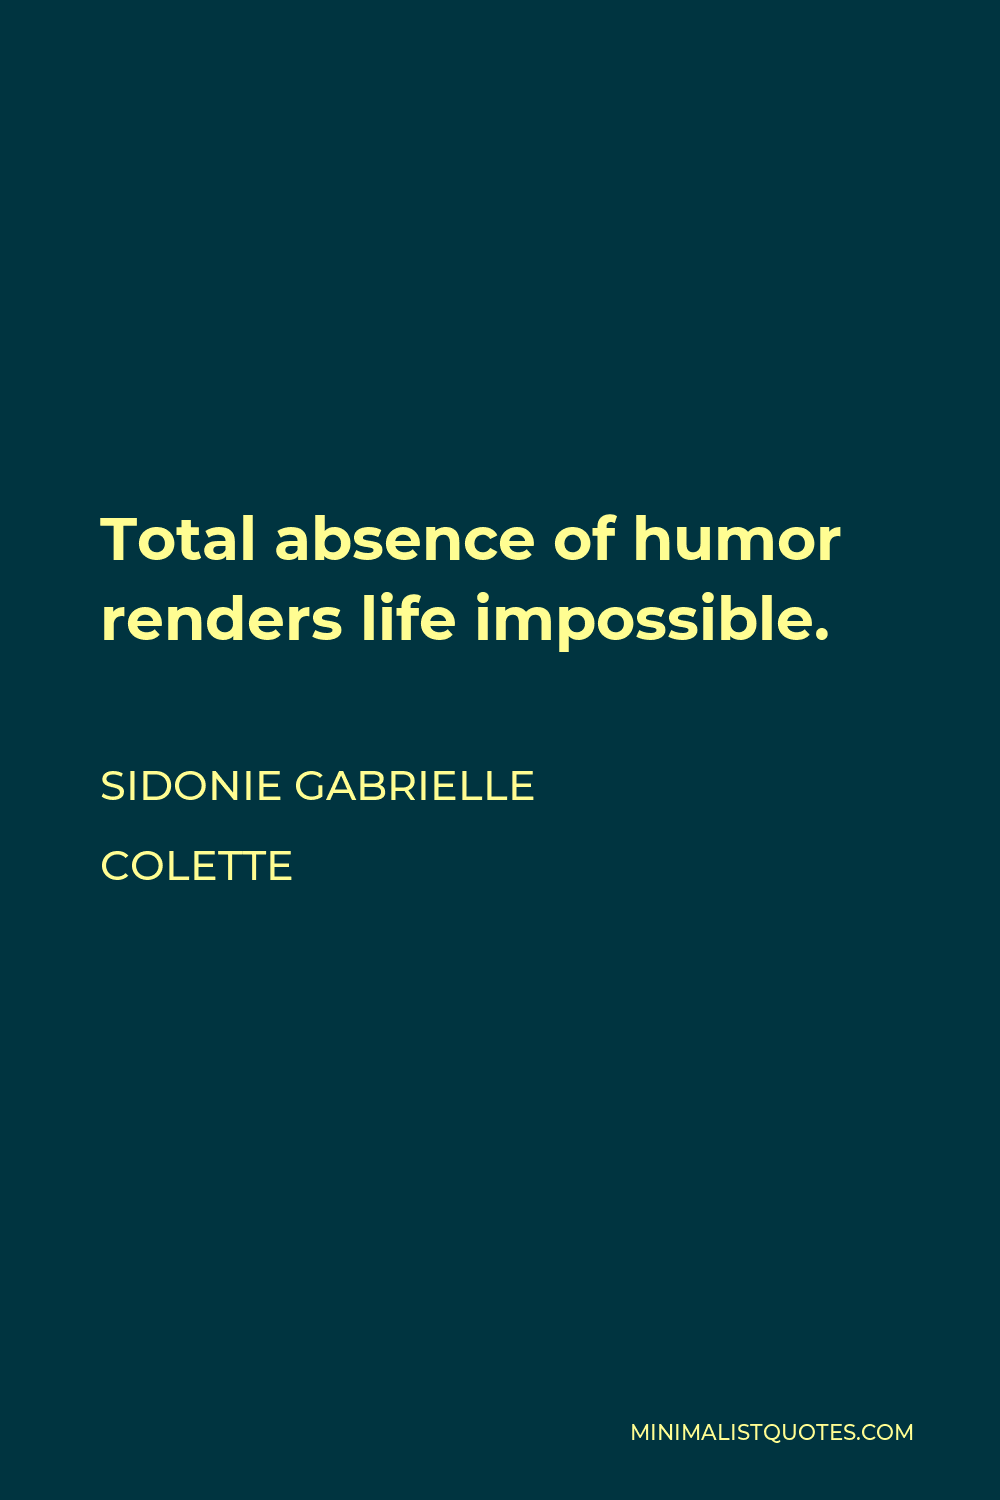 Sidonie Gabrielle Colette Quote - Total absence of humor renders life impossible.